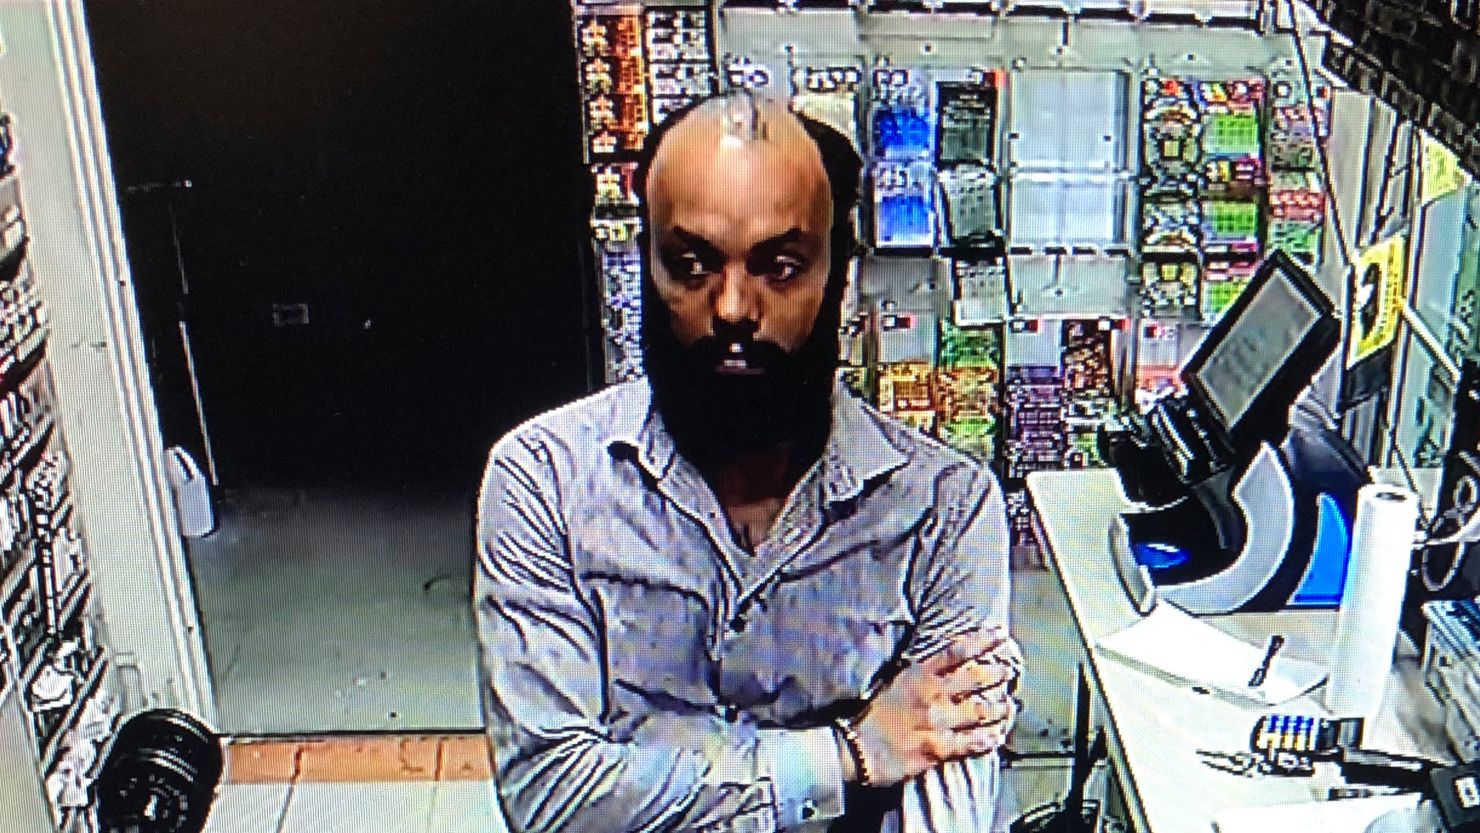 A Connecticut man stole $17,000 during his first solo shift at a Hamden gas station, police say. The owner of the gas station doesn't know the man's name.